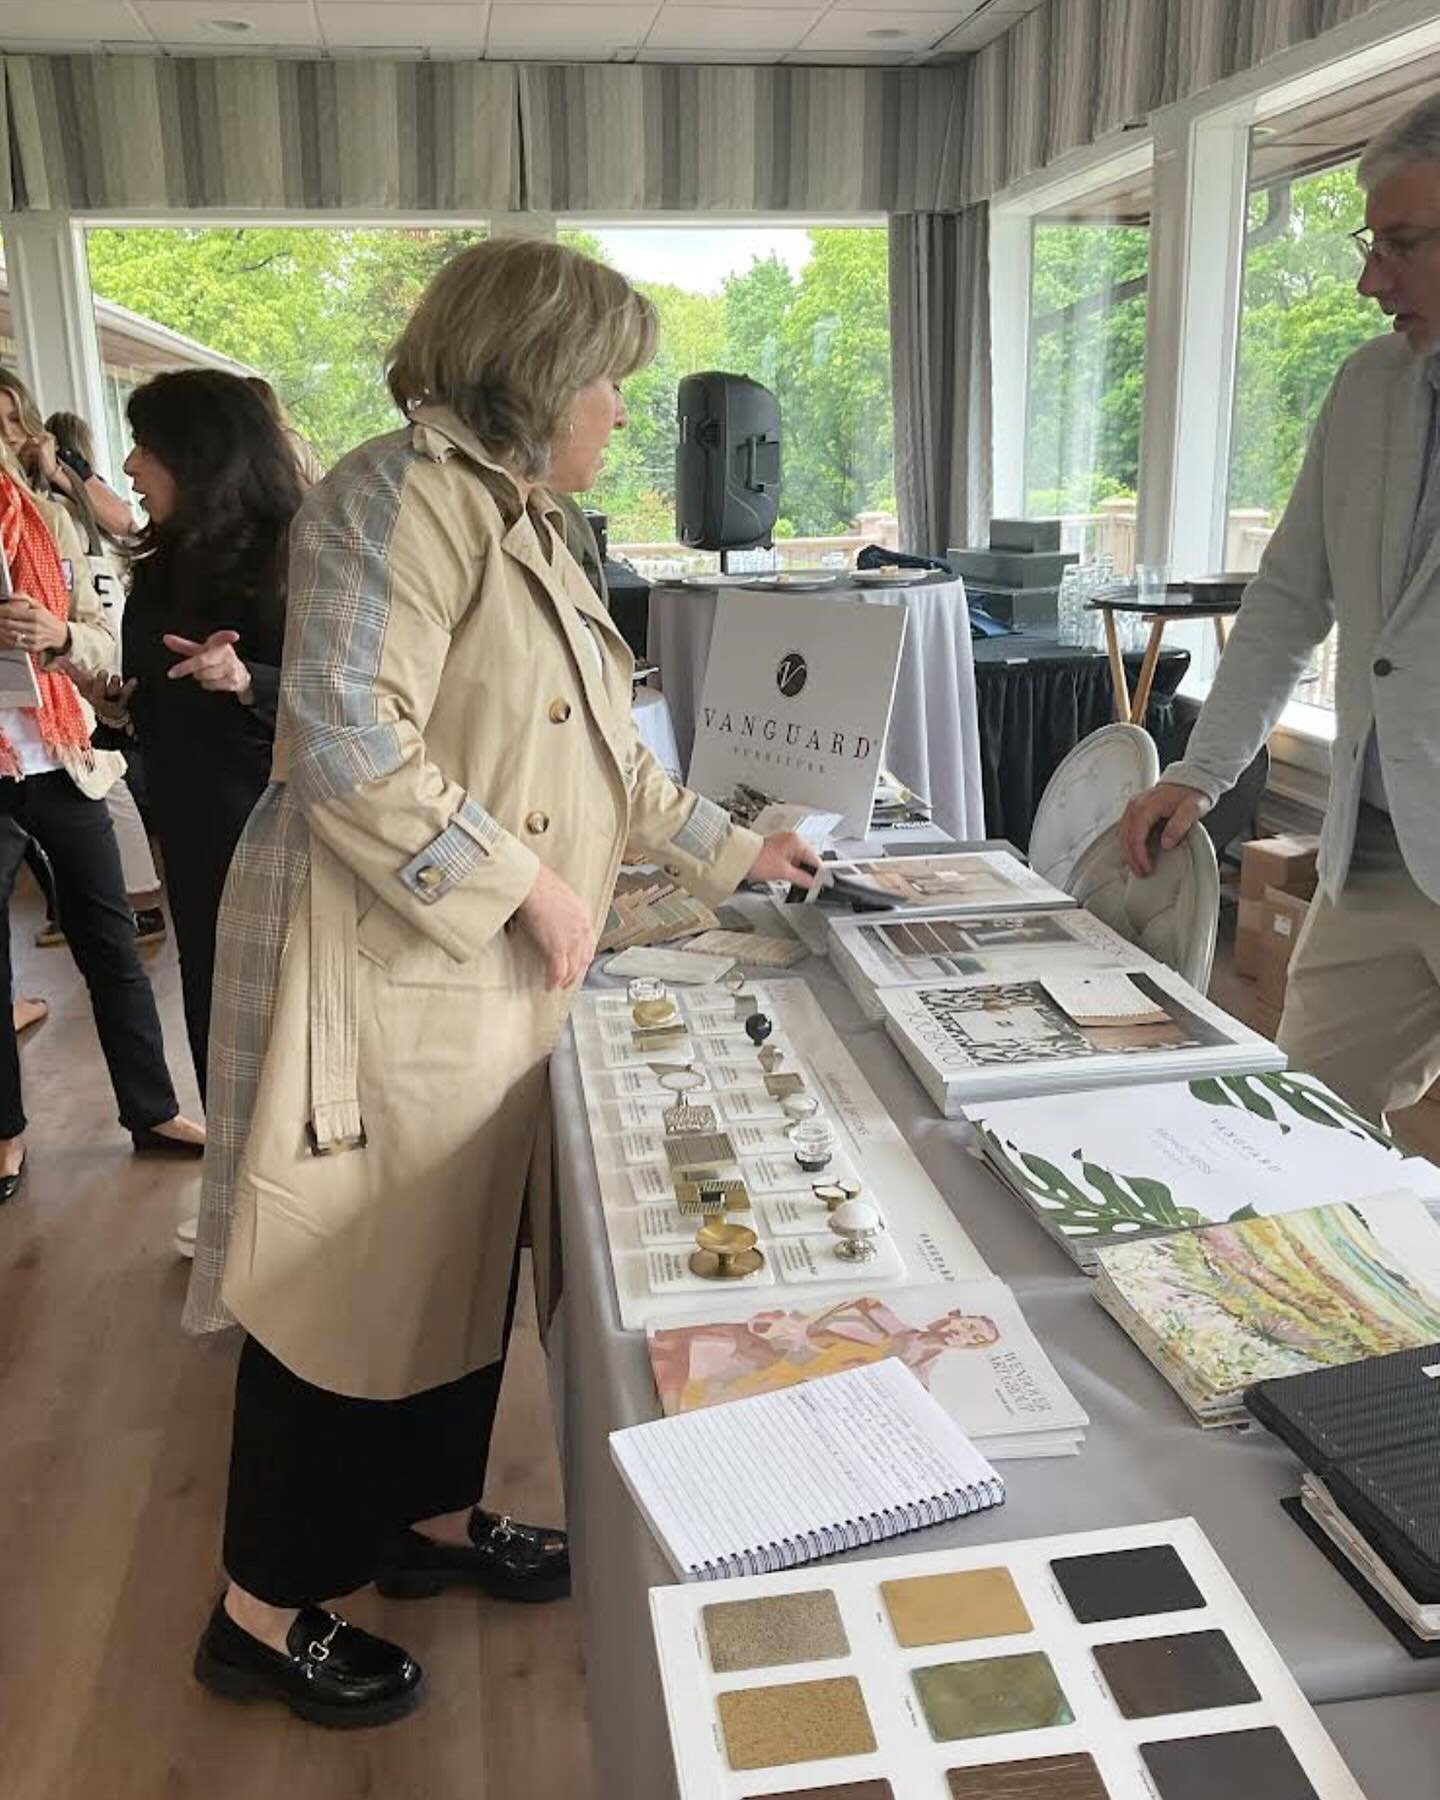 Marty at the Vendor Spotlight this week! Thank you, Basking Ridge Country Club for hosting. 

The Elements team got to hear about latest collections from high-end design brands. We are always looking for new products to incorporate into our designs.
